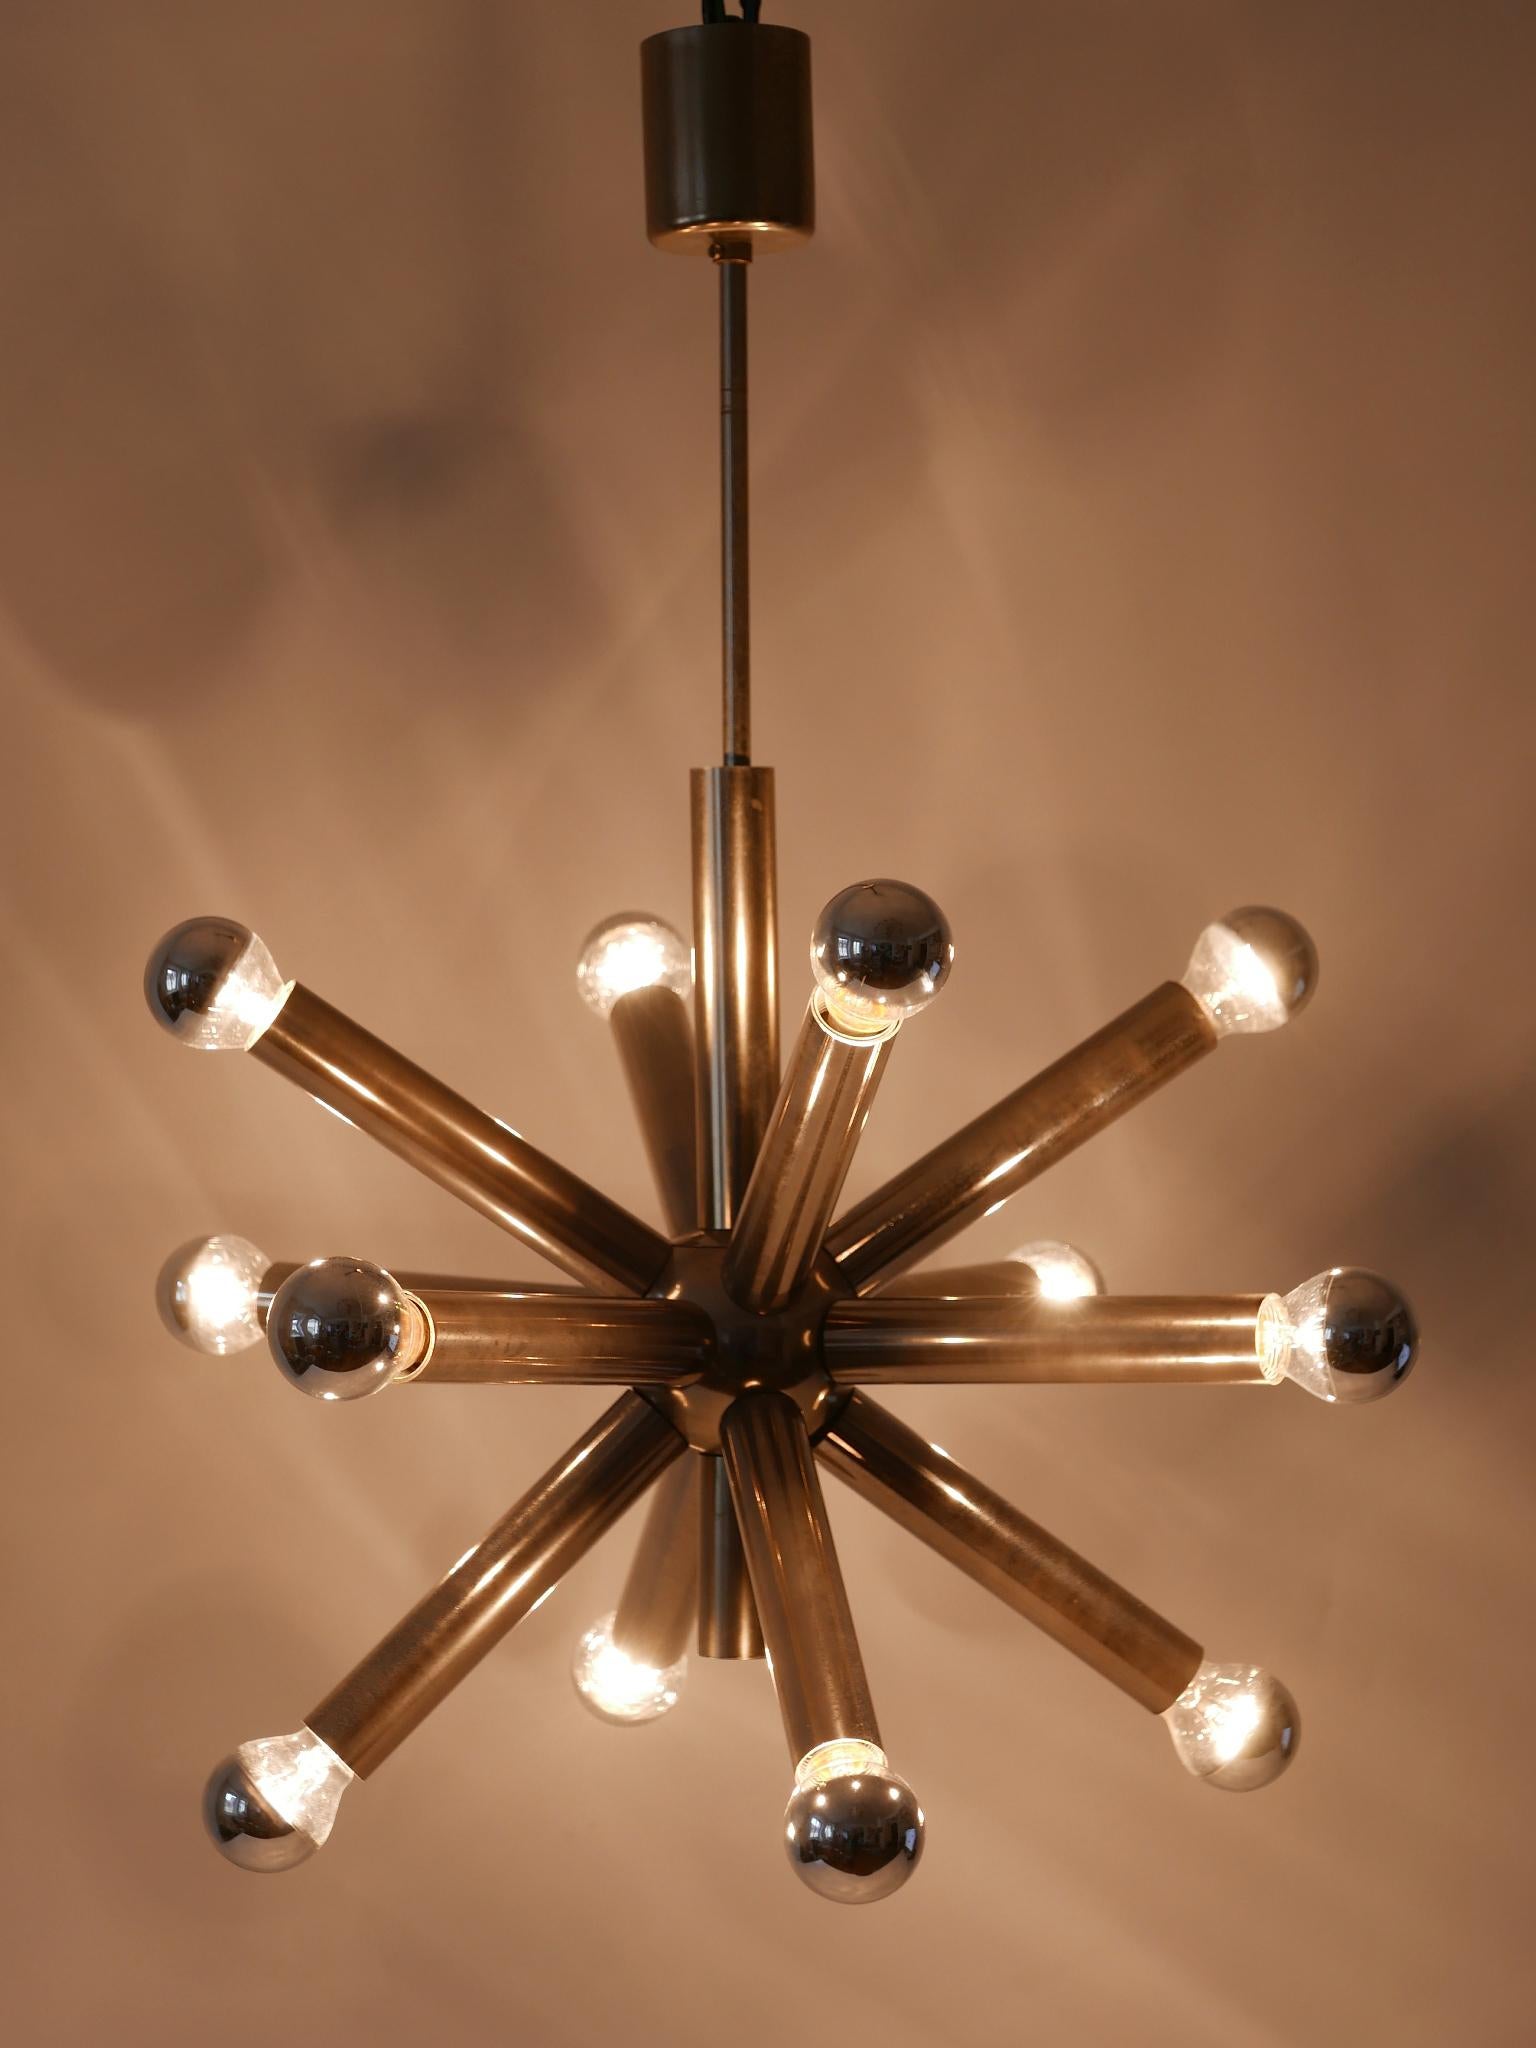 Gorgeous, elegant 12-armed Mid-Century Modern Sputnik chandelier or pendant lamp. Designed and manufactured in 1960s, Germany.

Executed in nickel-plated brass and metal, the chandelier or pendant lamp needs 12 x E14/E12 screw fit bulbs, is wired,